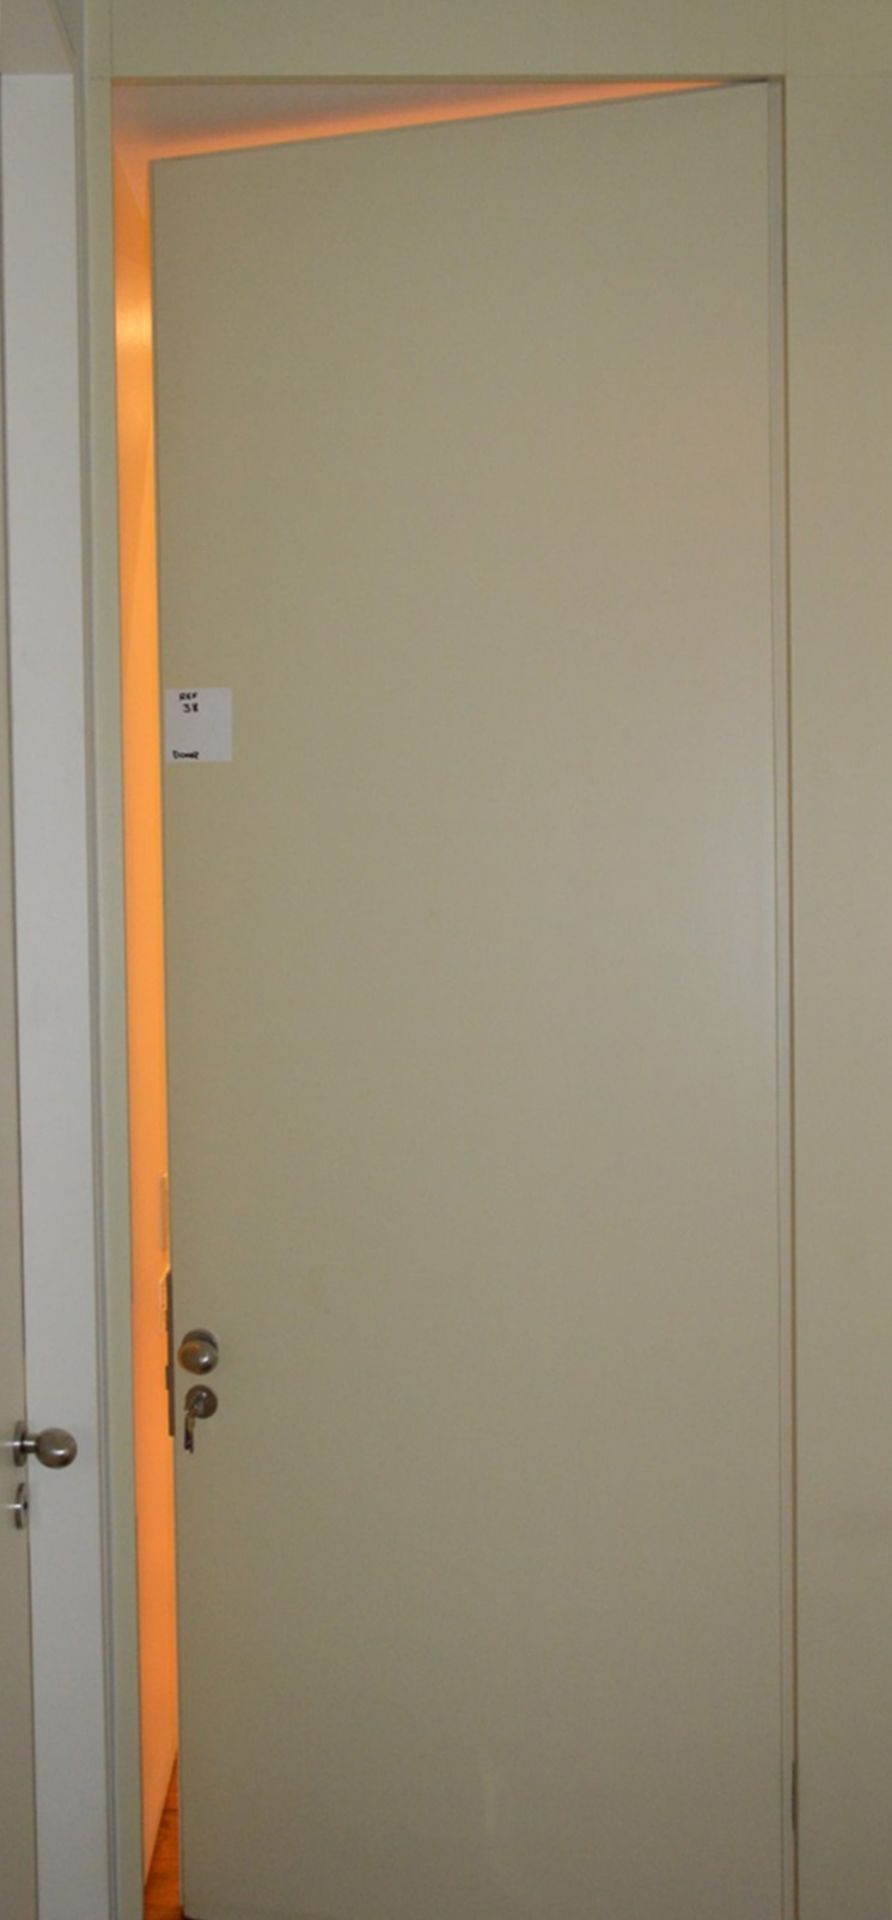 1 x Fire Resistant Internal Door - Fitted With Stylish Chrome Door Knobs, Triple Hinges and Lock - - Image 5 of 5